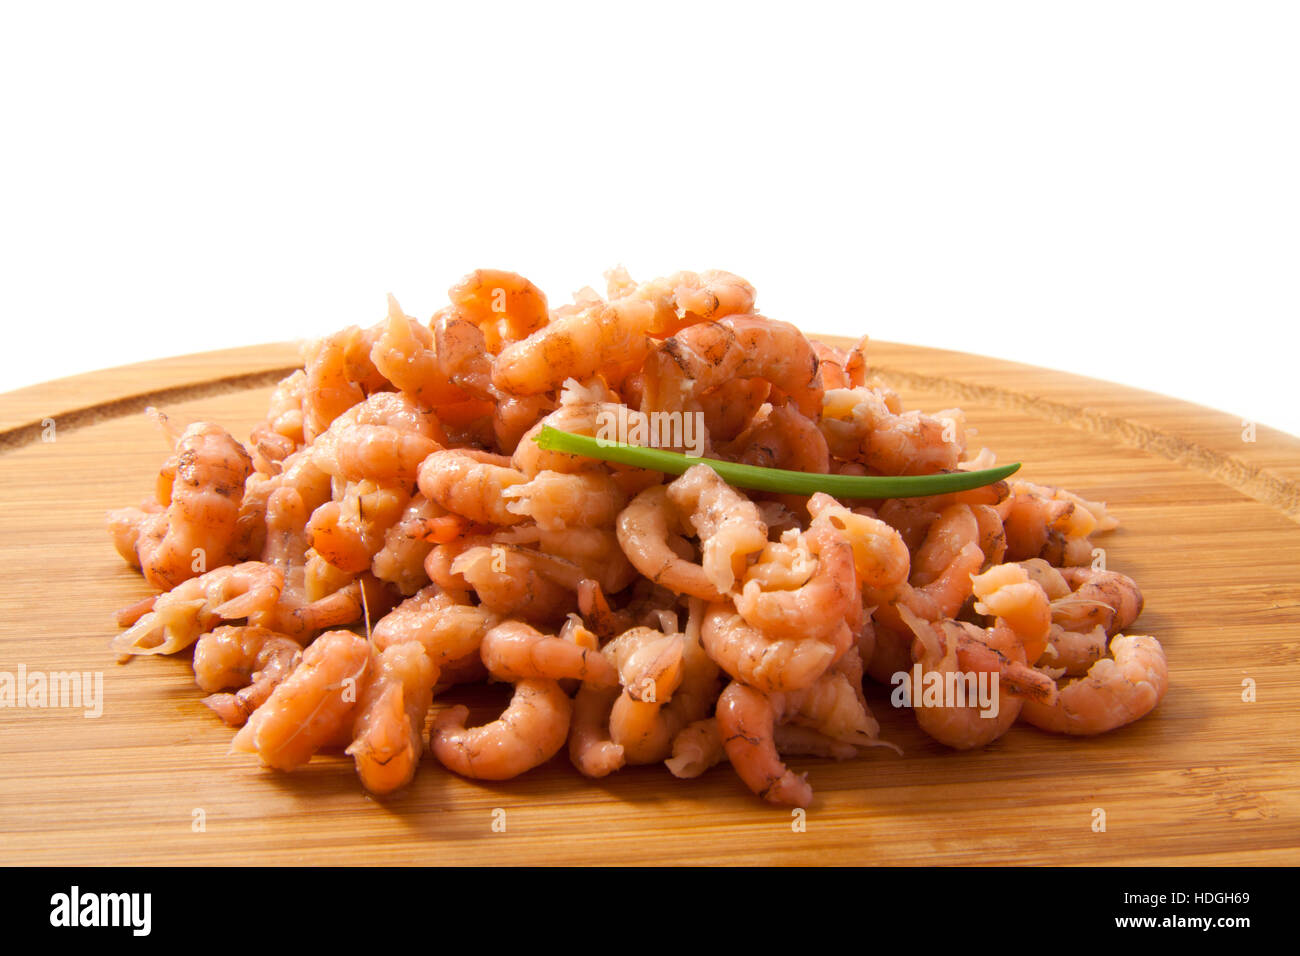 Shrimp on wooden plate with white background Stock Photo